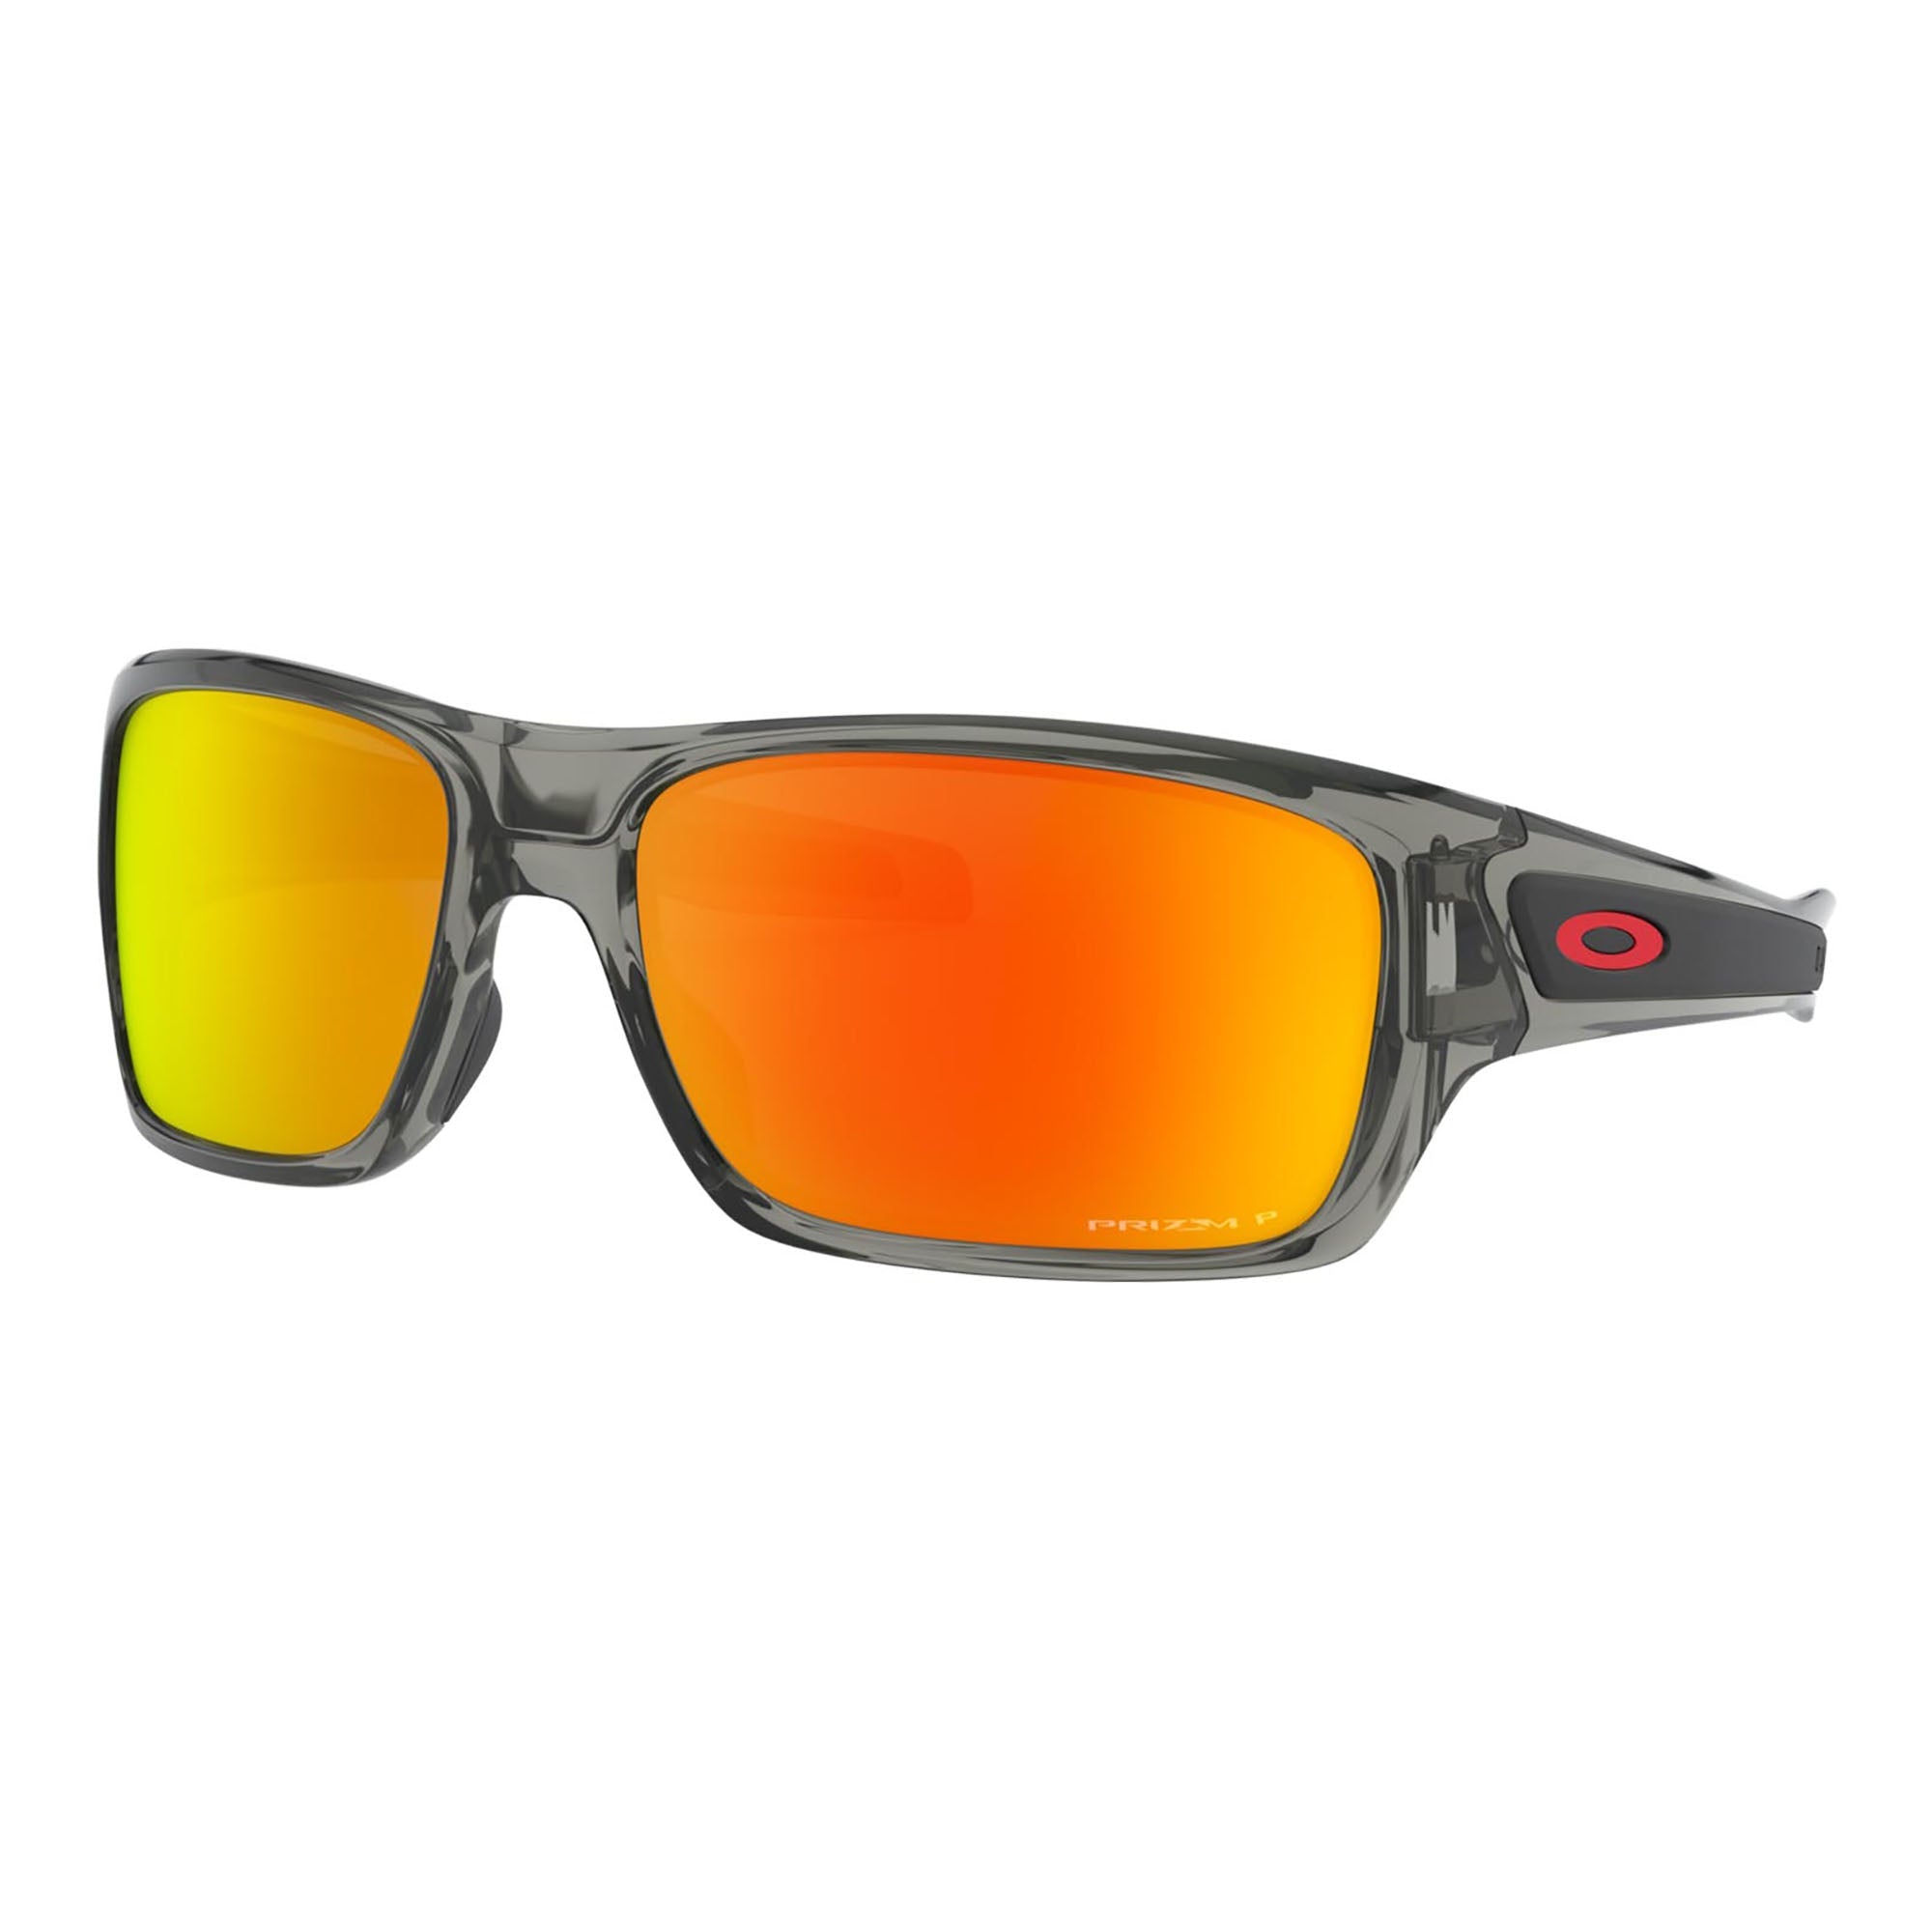 How To Buy Good Sunglasses for Any Outdoor Activity – Scout Life magazine